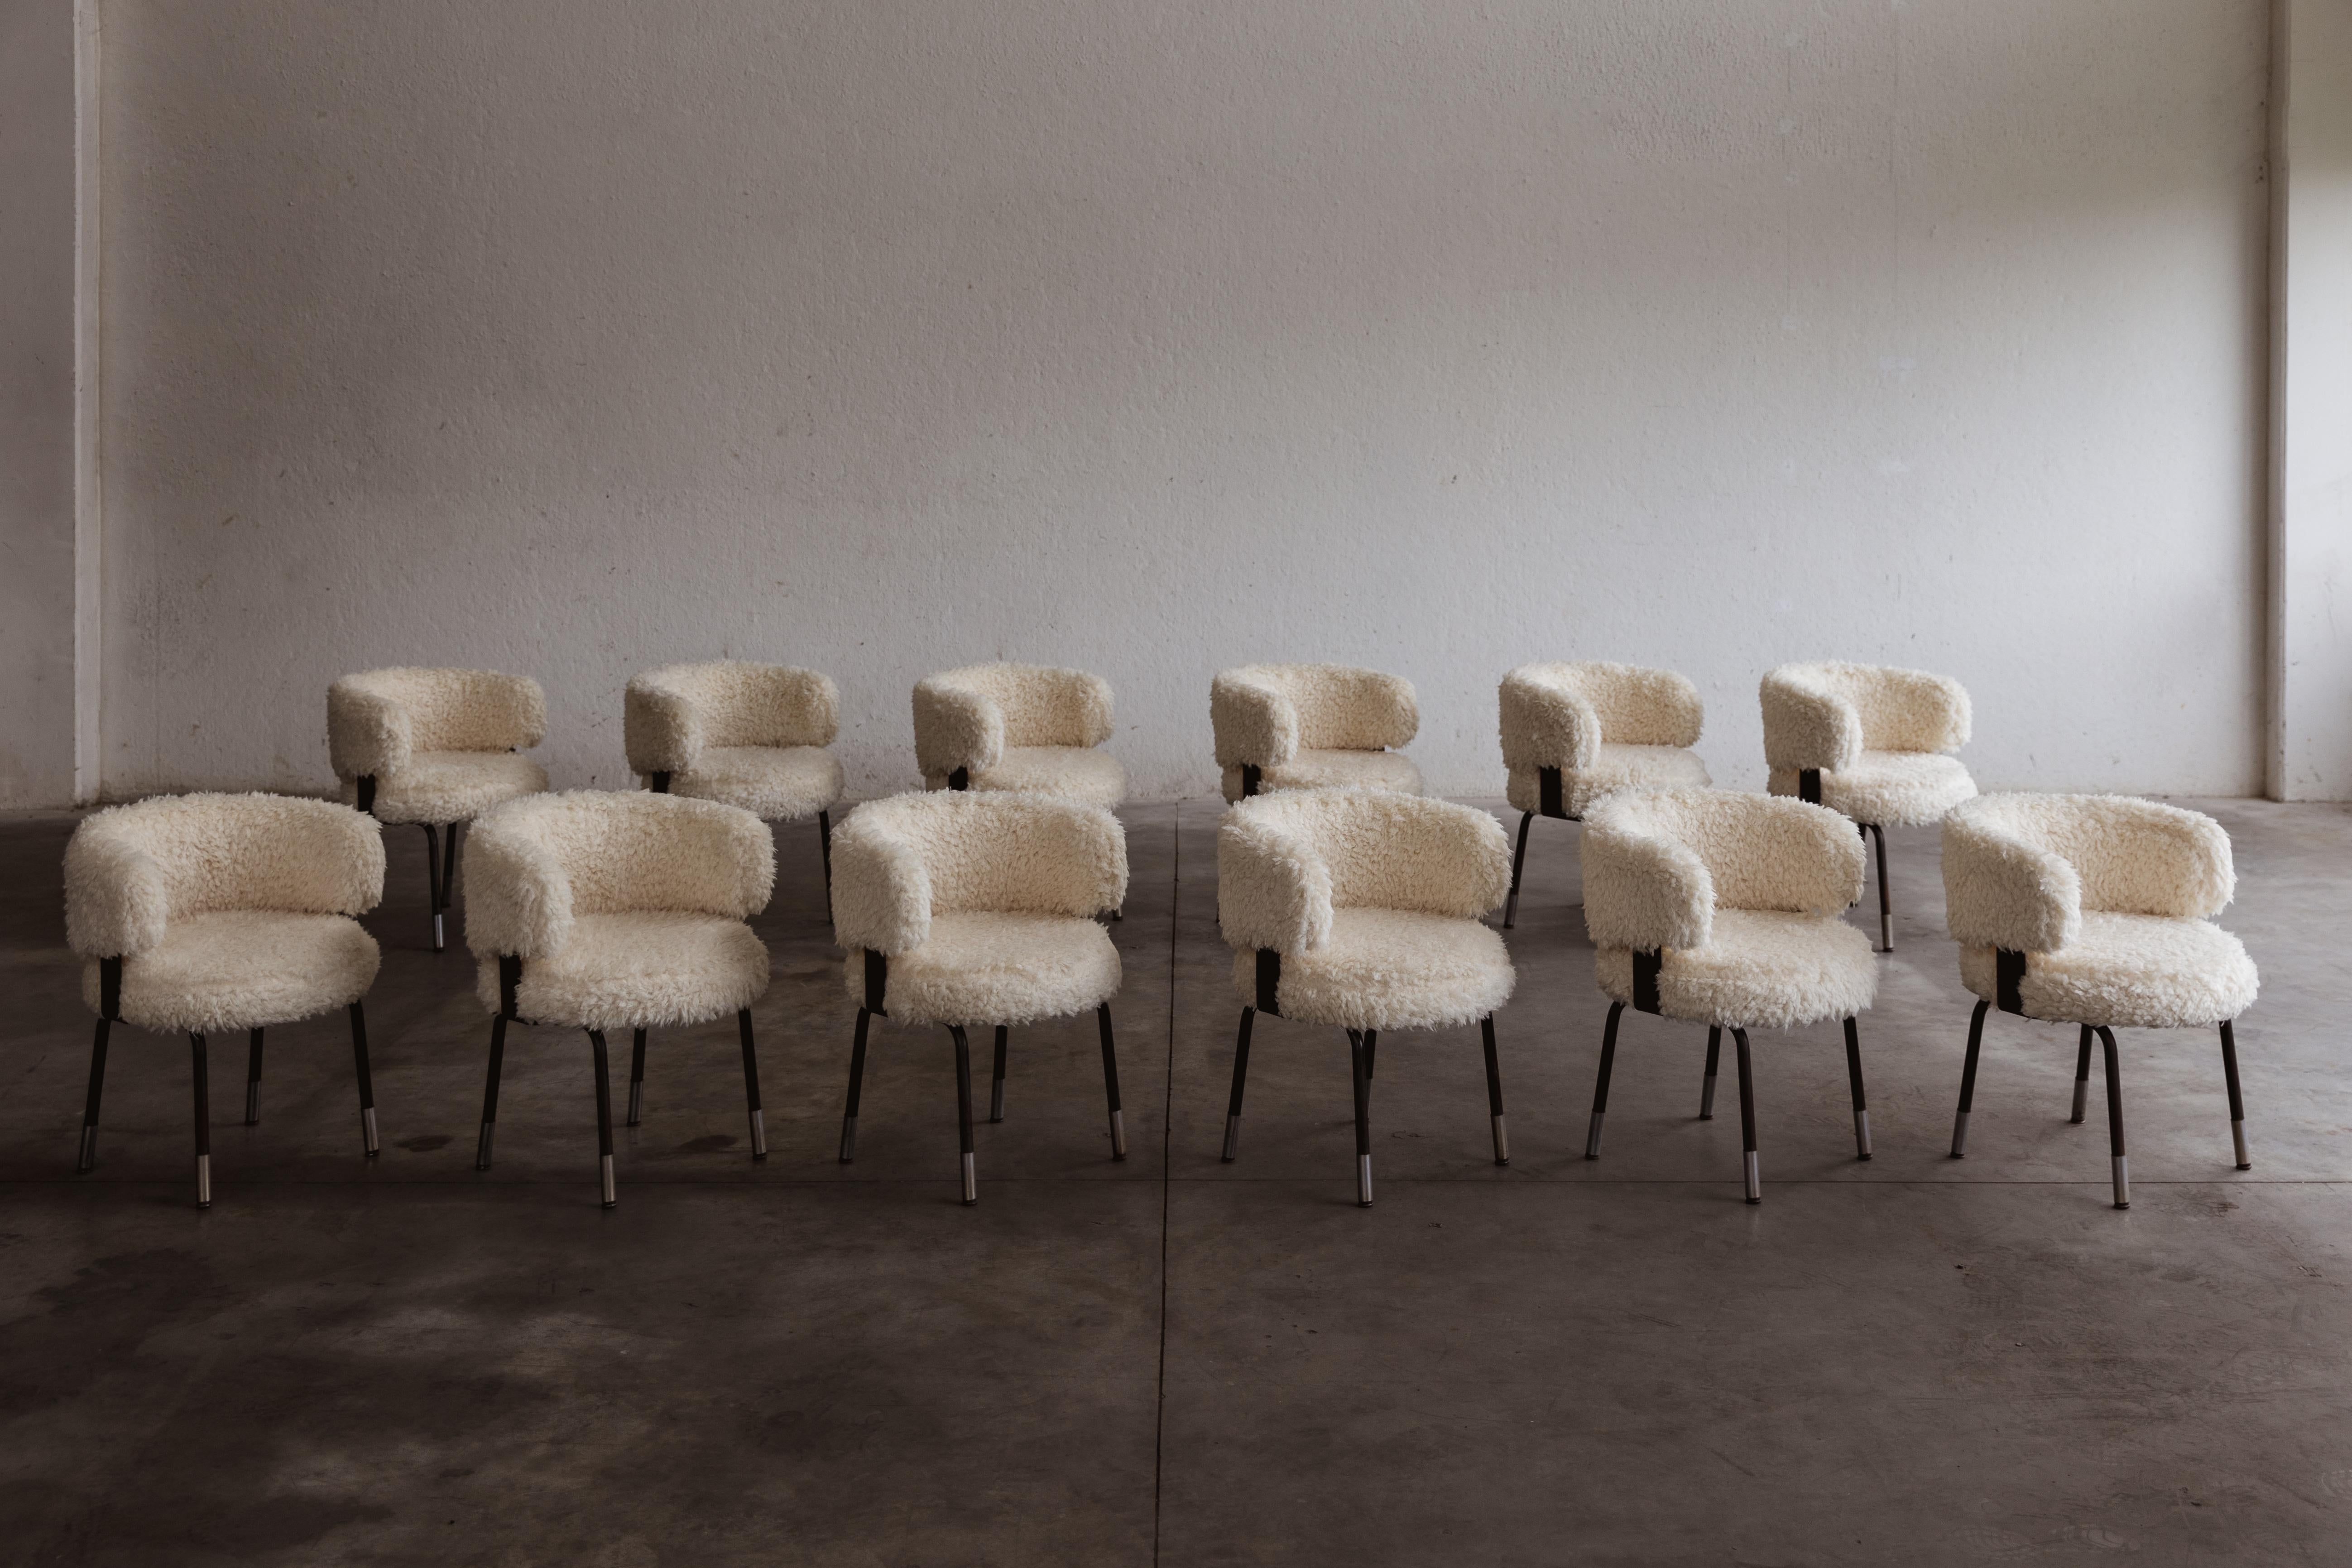 Gianni Moscatelli dining chairs for Formanova, faux-fur and iron, Italy, 1968, set of twelve.

These chairs represent timeless items designed by Gianni Moscatelli for Formanova in the 1960s. Its design features pure and functional lines, enhanced by